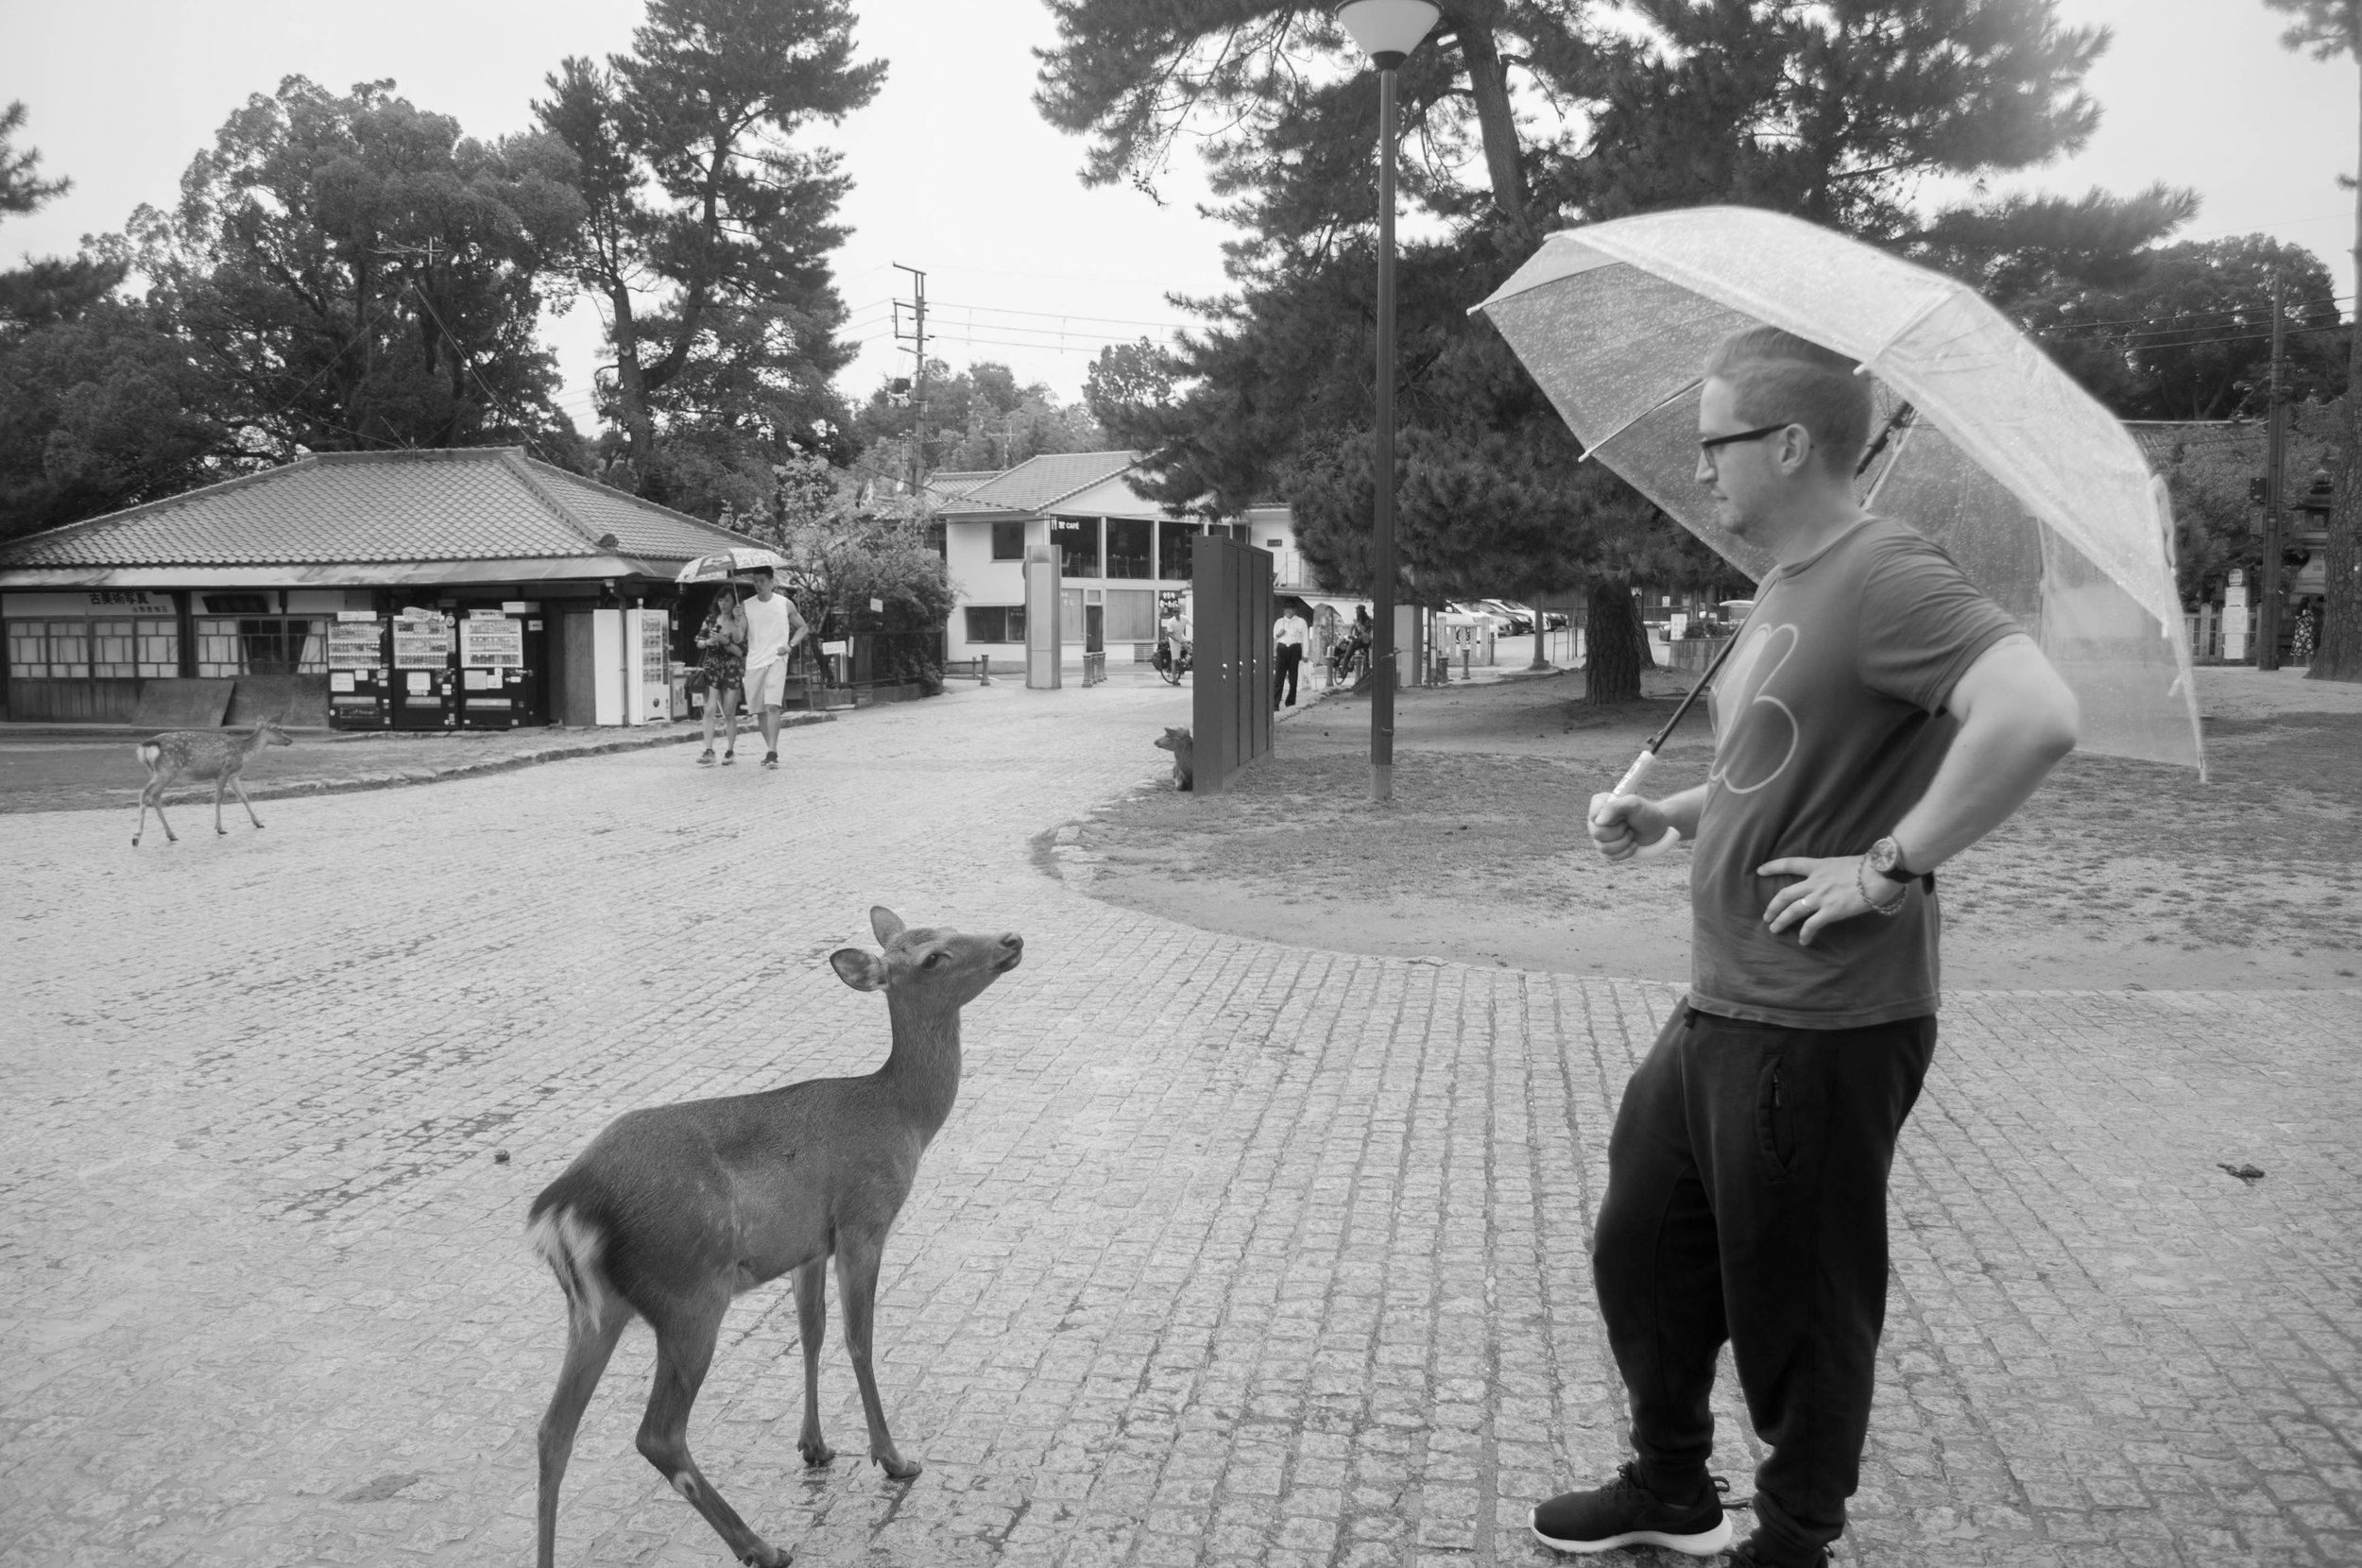 Nara and its deer part of the itinerary for couples doing their honeymoon in Japan